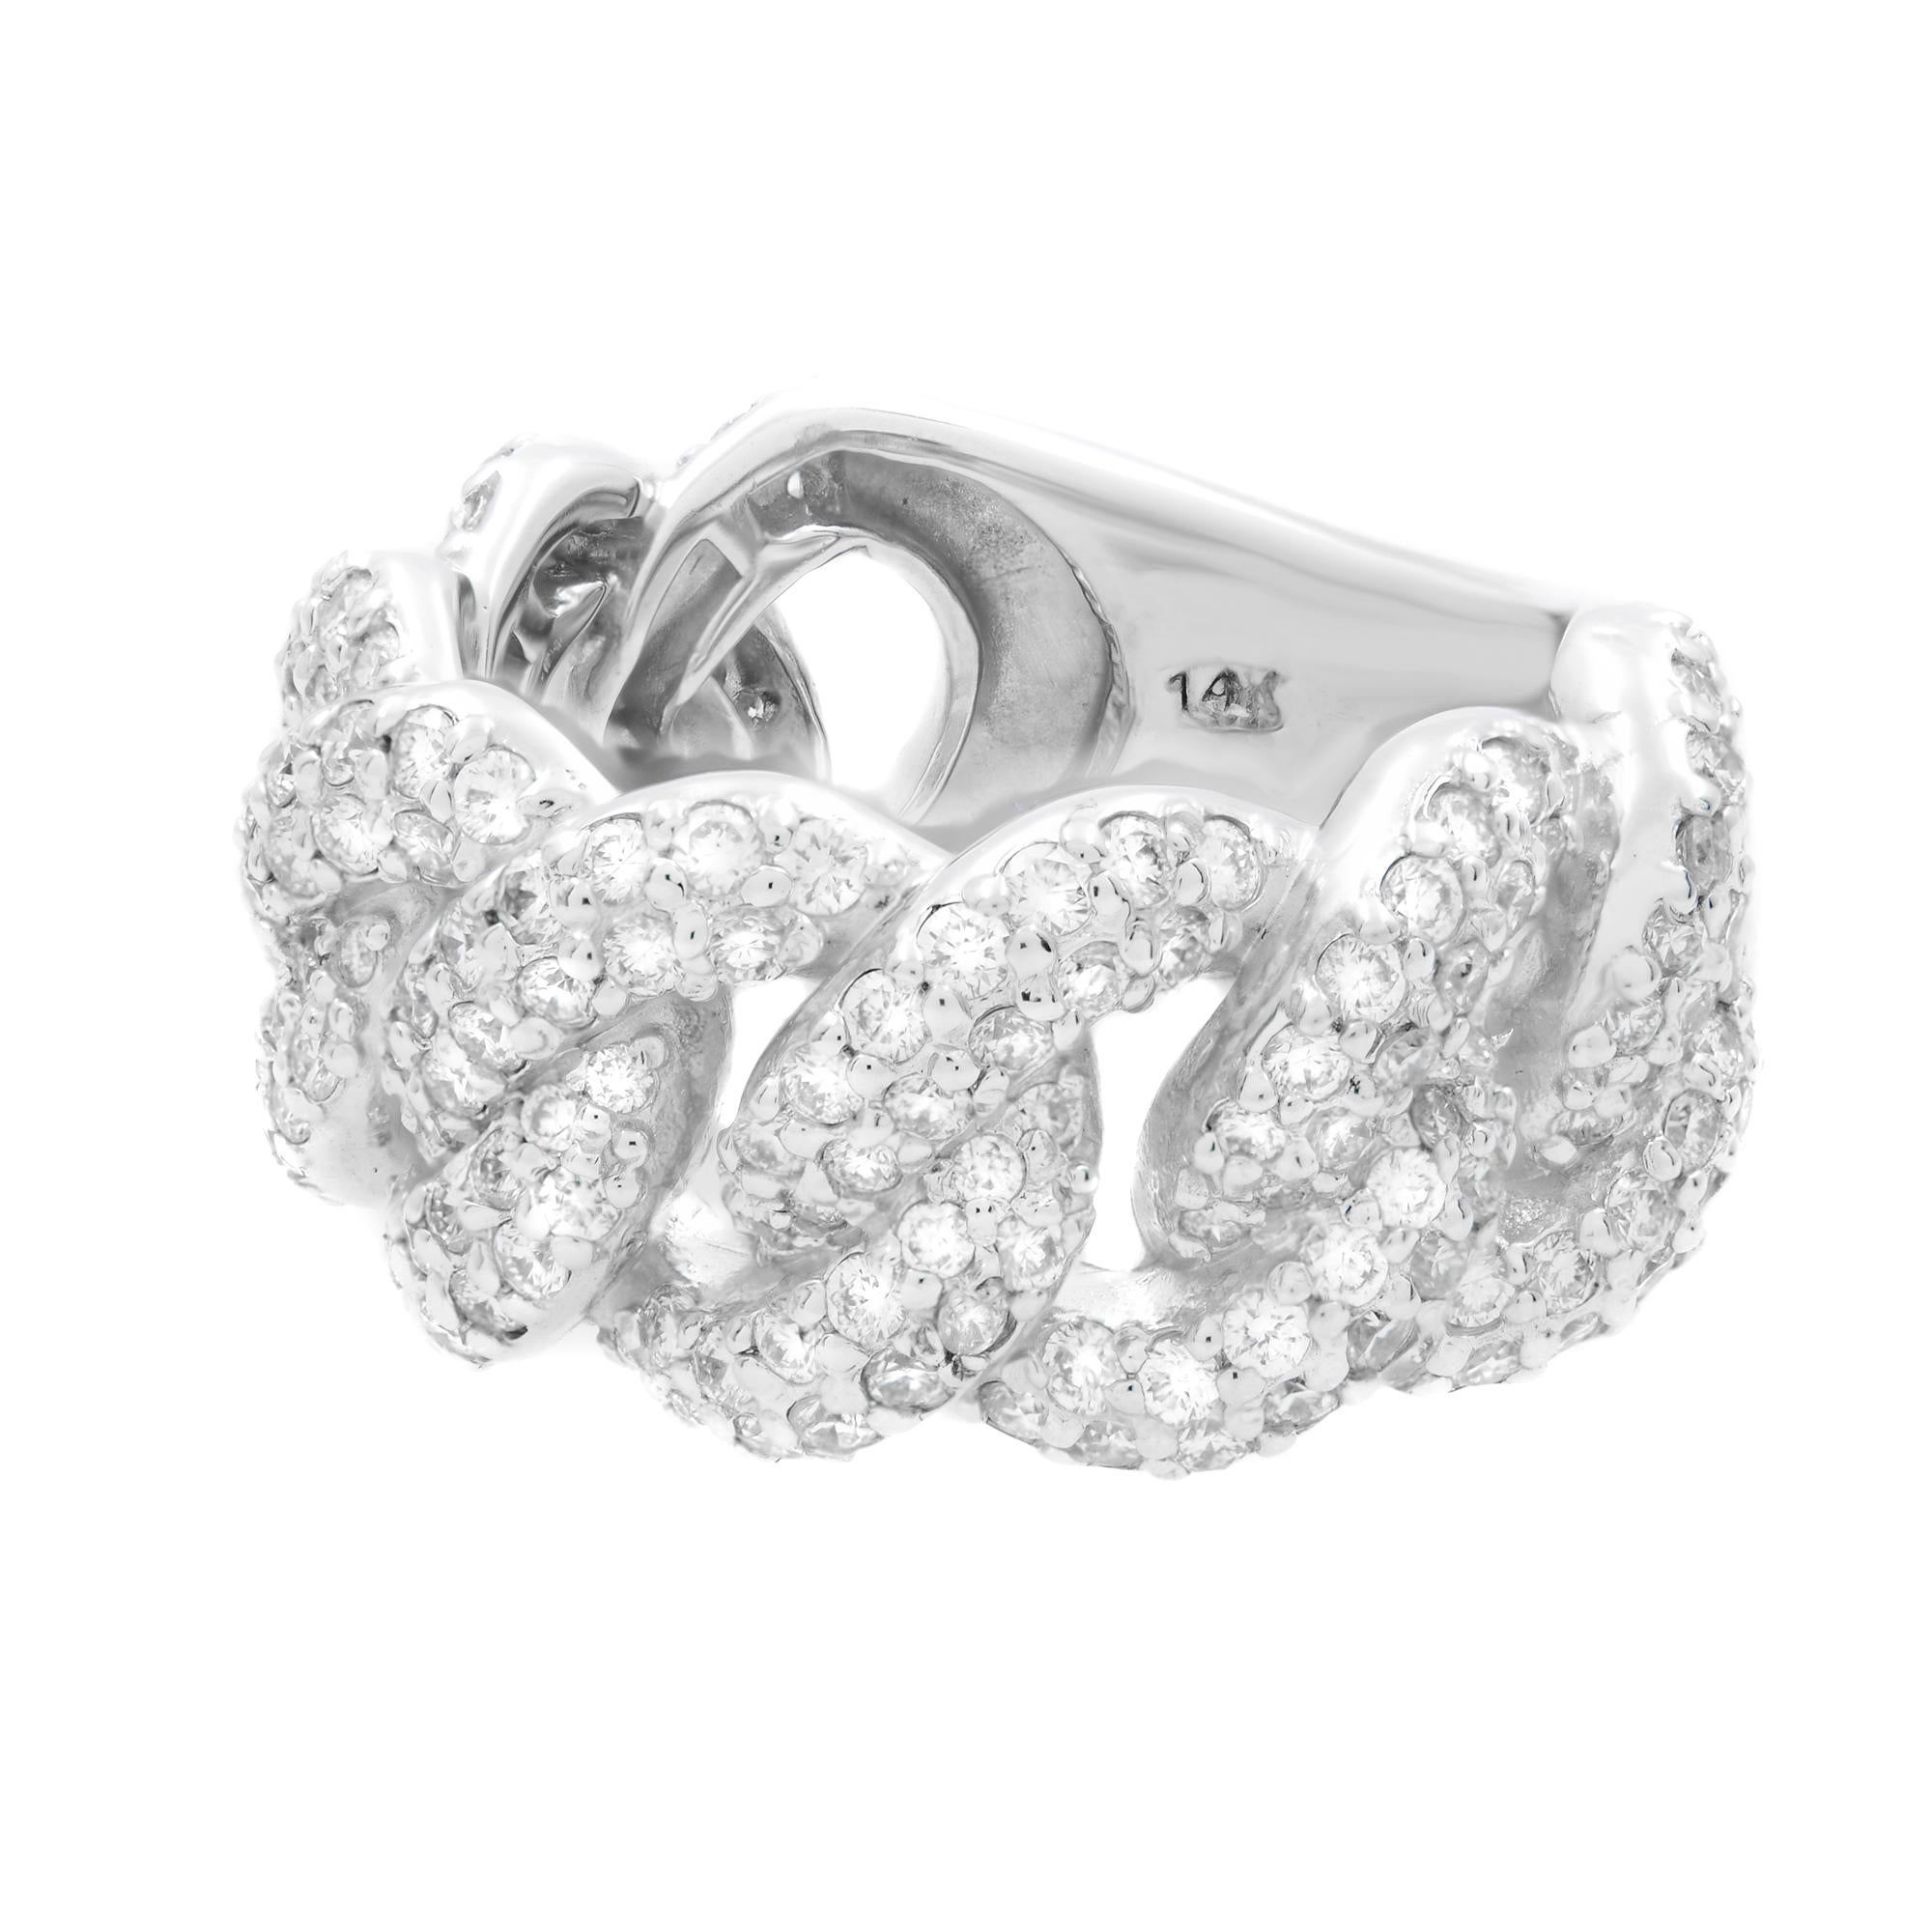 A brilliant 14K white gold diamond Cuban link diamond unisex ring. Size 8.5. set with 2.40cttw white round cut diamonds. Diamond color G-H and VS-SI clarity. Width of the ring is 11.60mm. The ring comes with a presentable gift box and our companies